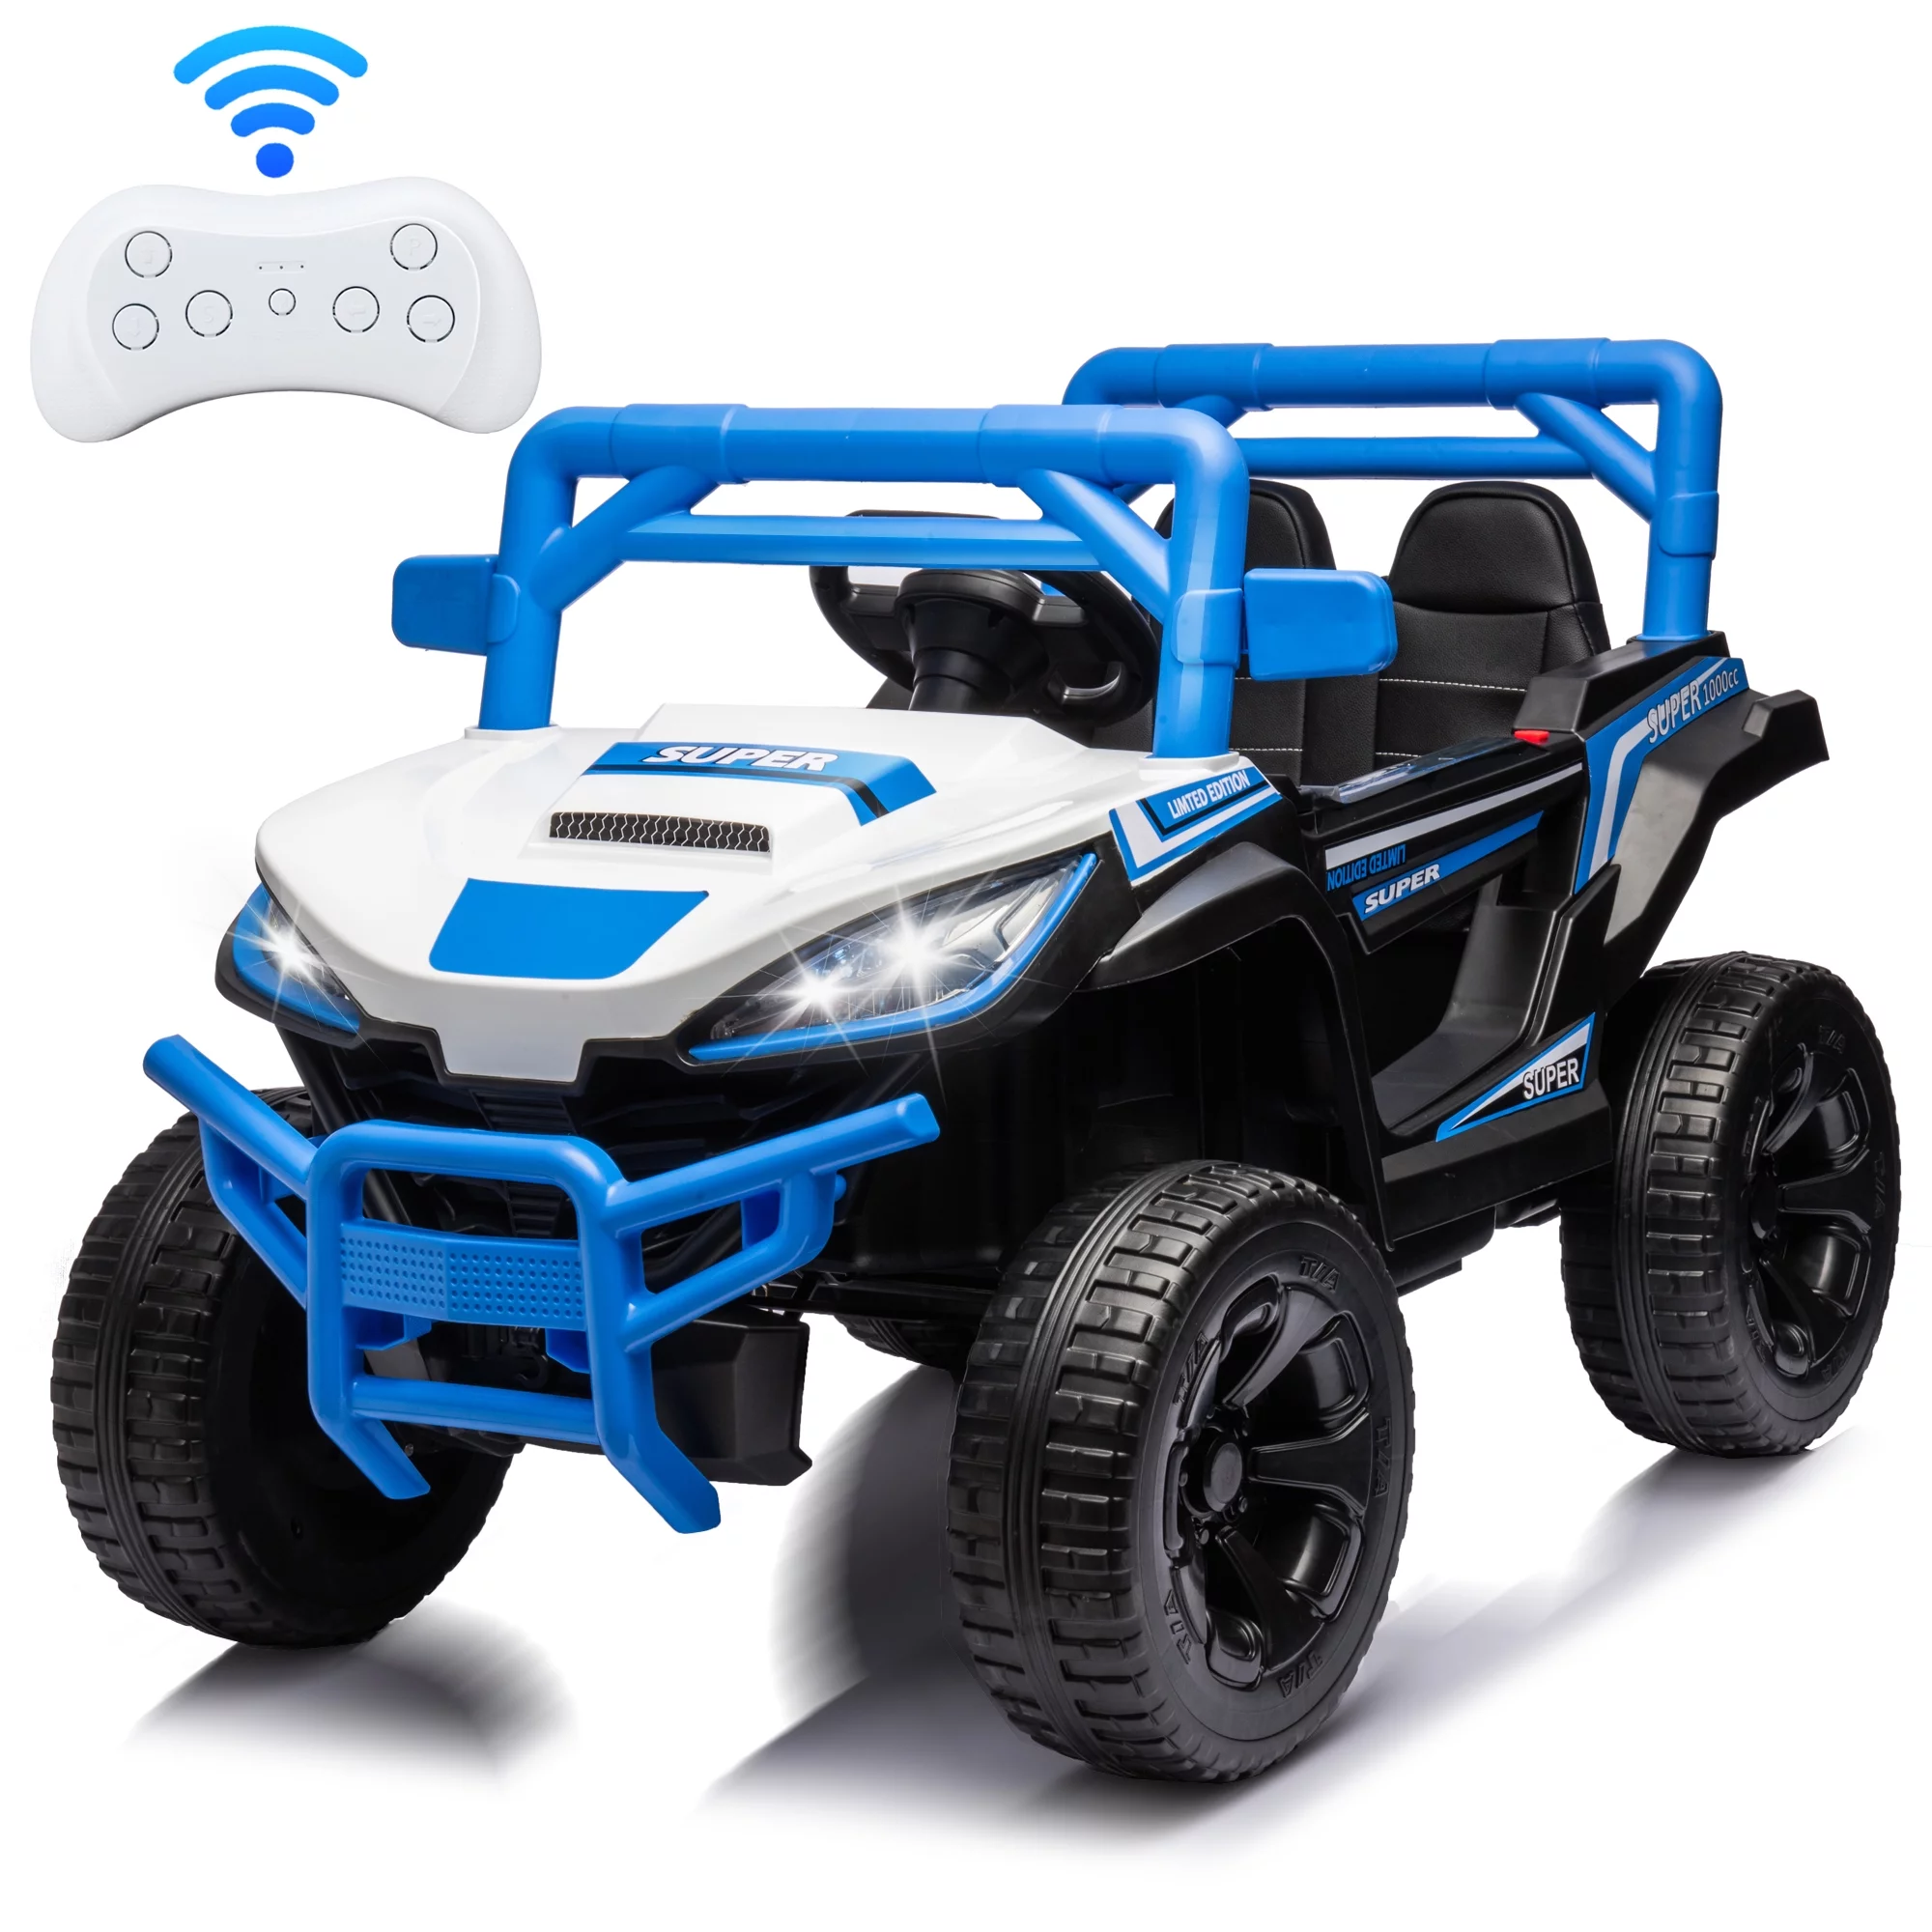 iYofe 12V Ride on UTV Car, Powerful Ride on Toy with Remote Control, 4 Wheels Suspension, Safety Belt, MP3 Player, Electric Vehicle for Boy & Gril